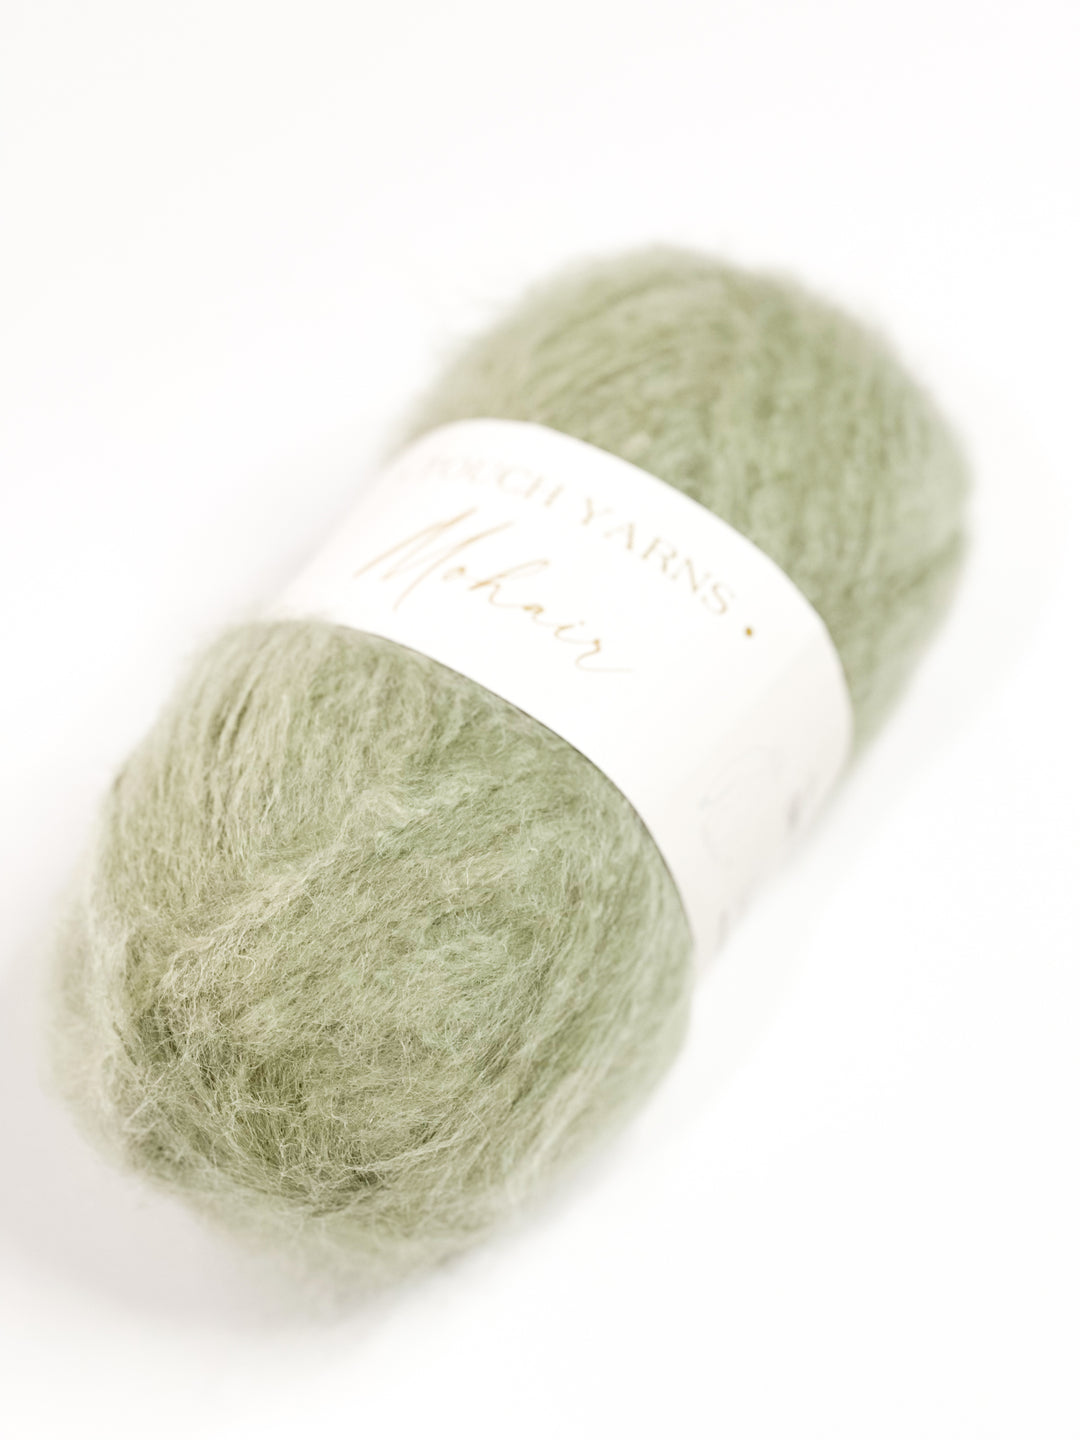 Touch Yarns Mohair